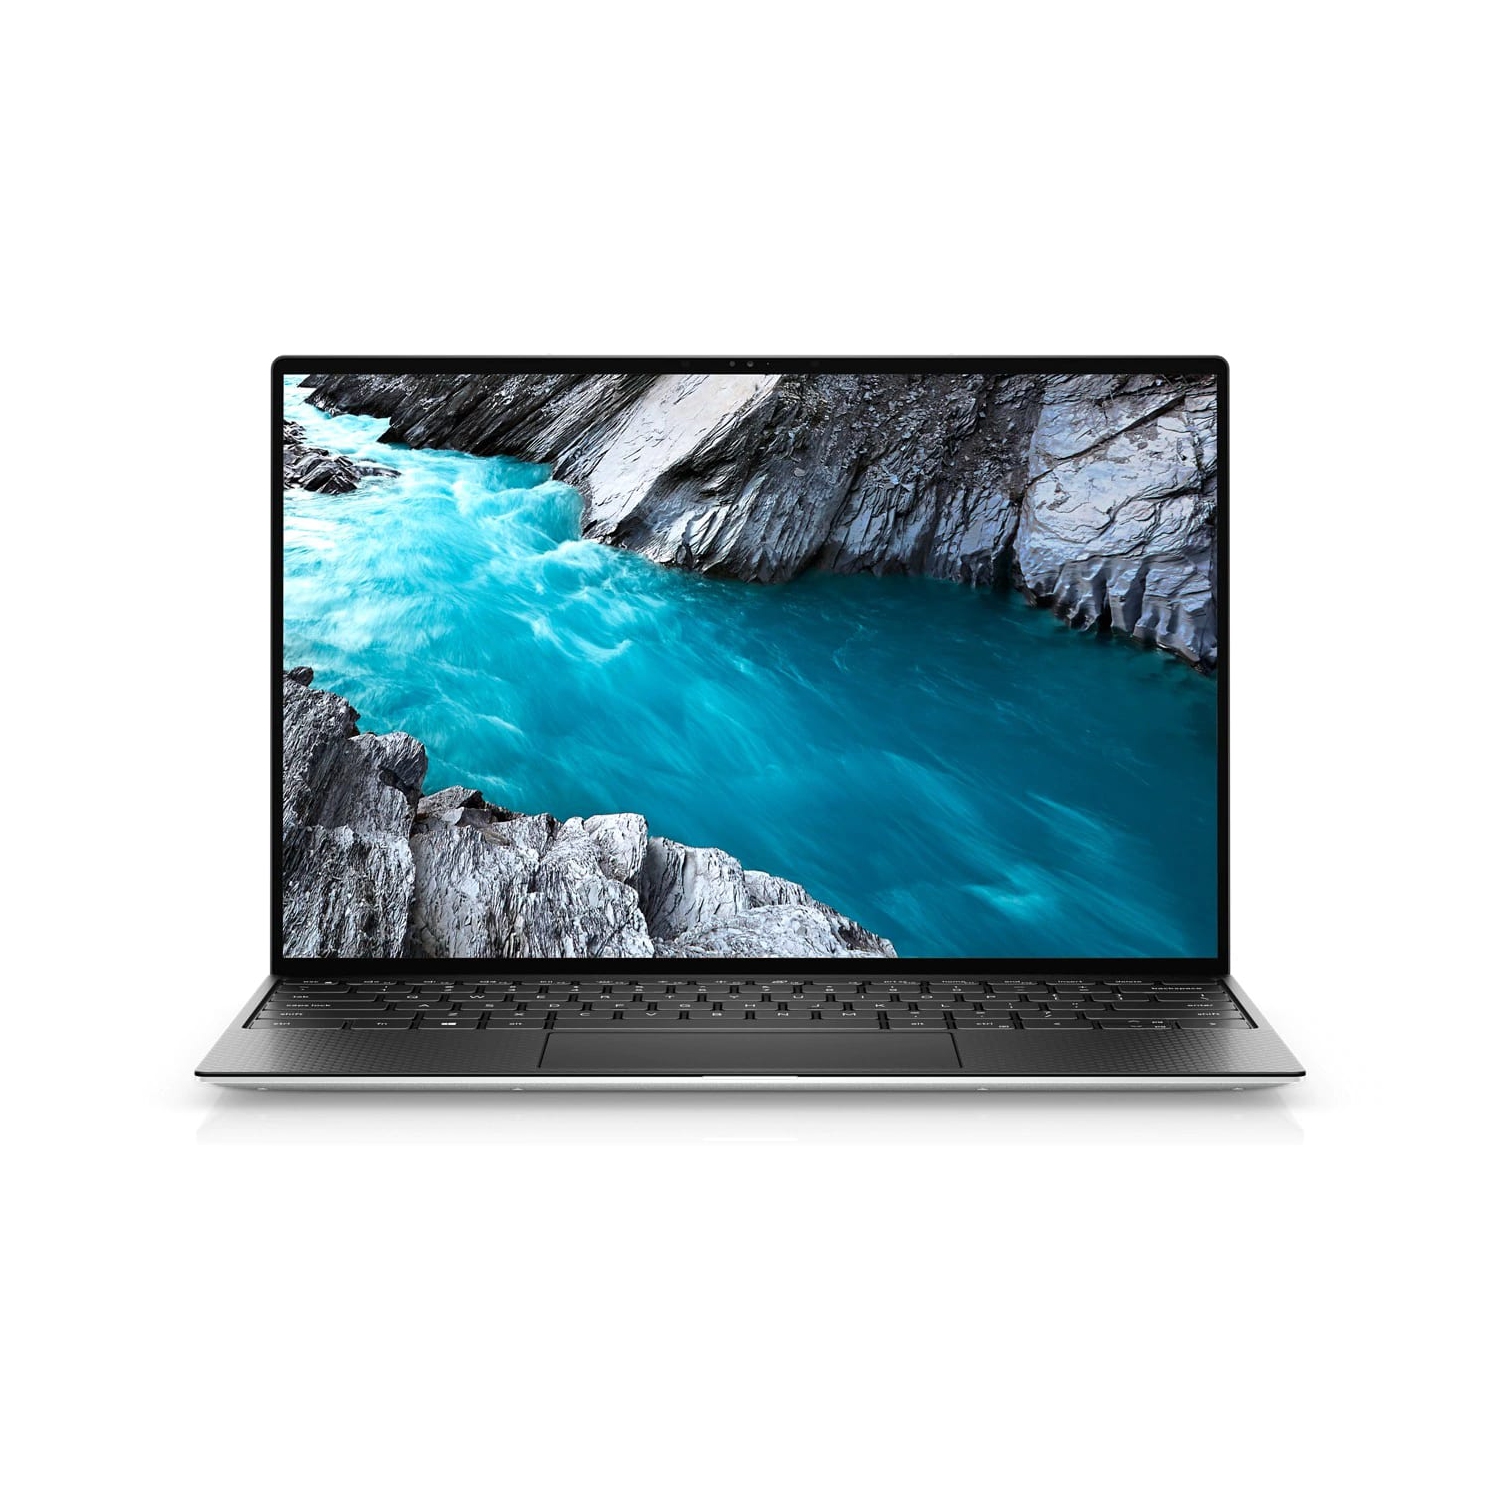 Dell XPS 13 9310 Laptop (2020) | 13.4" 4K Touch | Core i7 - 256GB SSD - 8GB RAM | 4 Cores @ 4.7 GHz - 11th Gen CPU Certified Refurbished